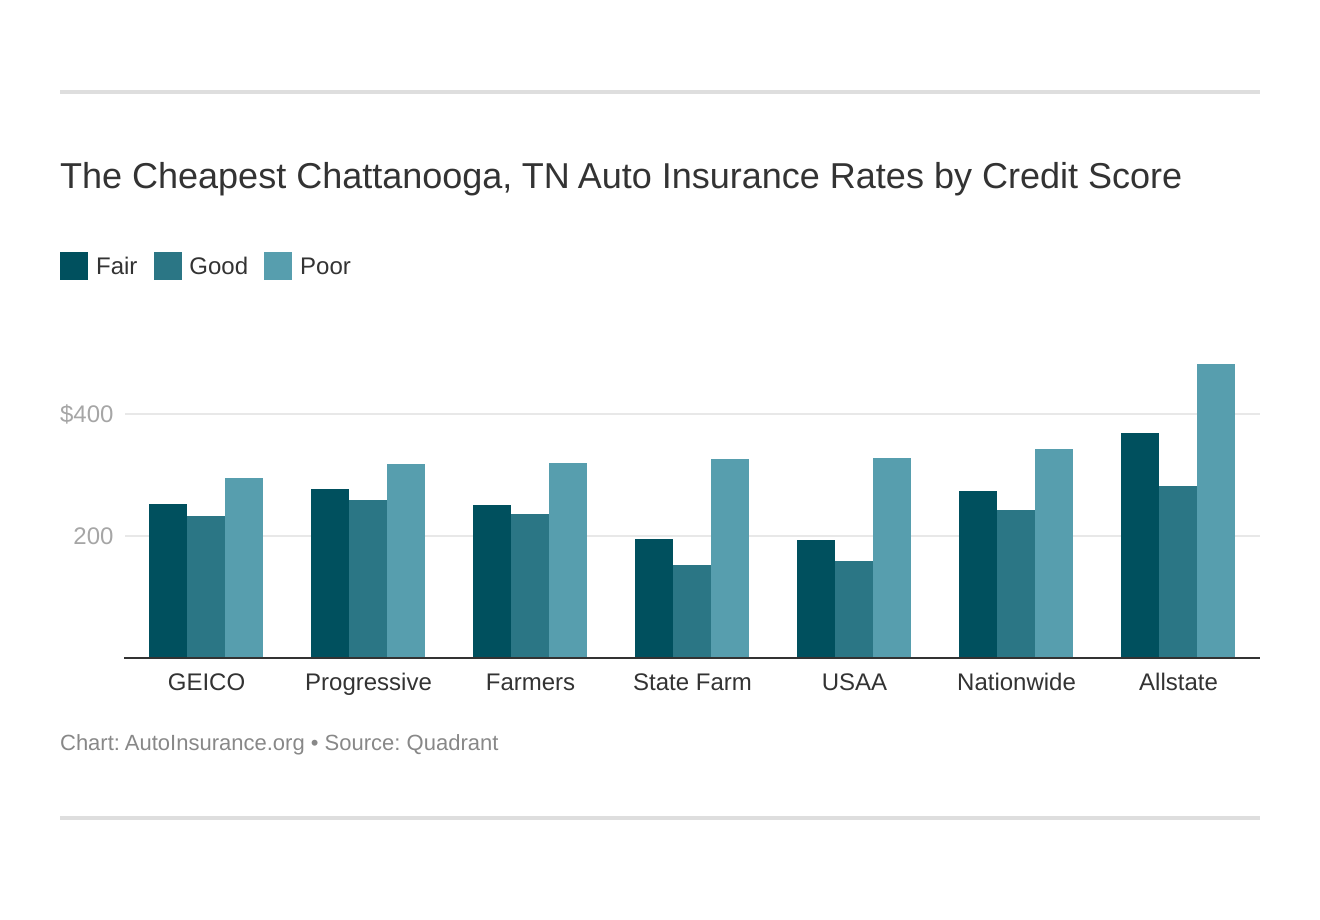 The Cheapest Chattanooga, TN Auto Insurance Rates by Credit Score